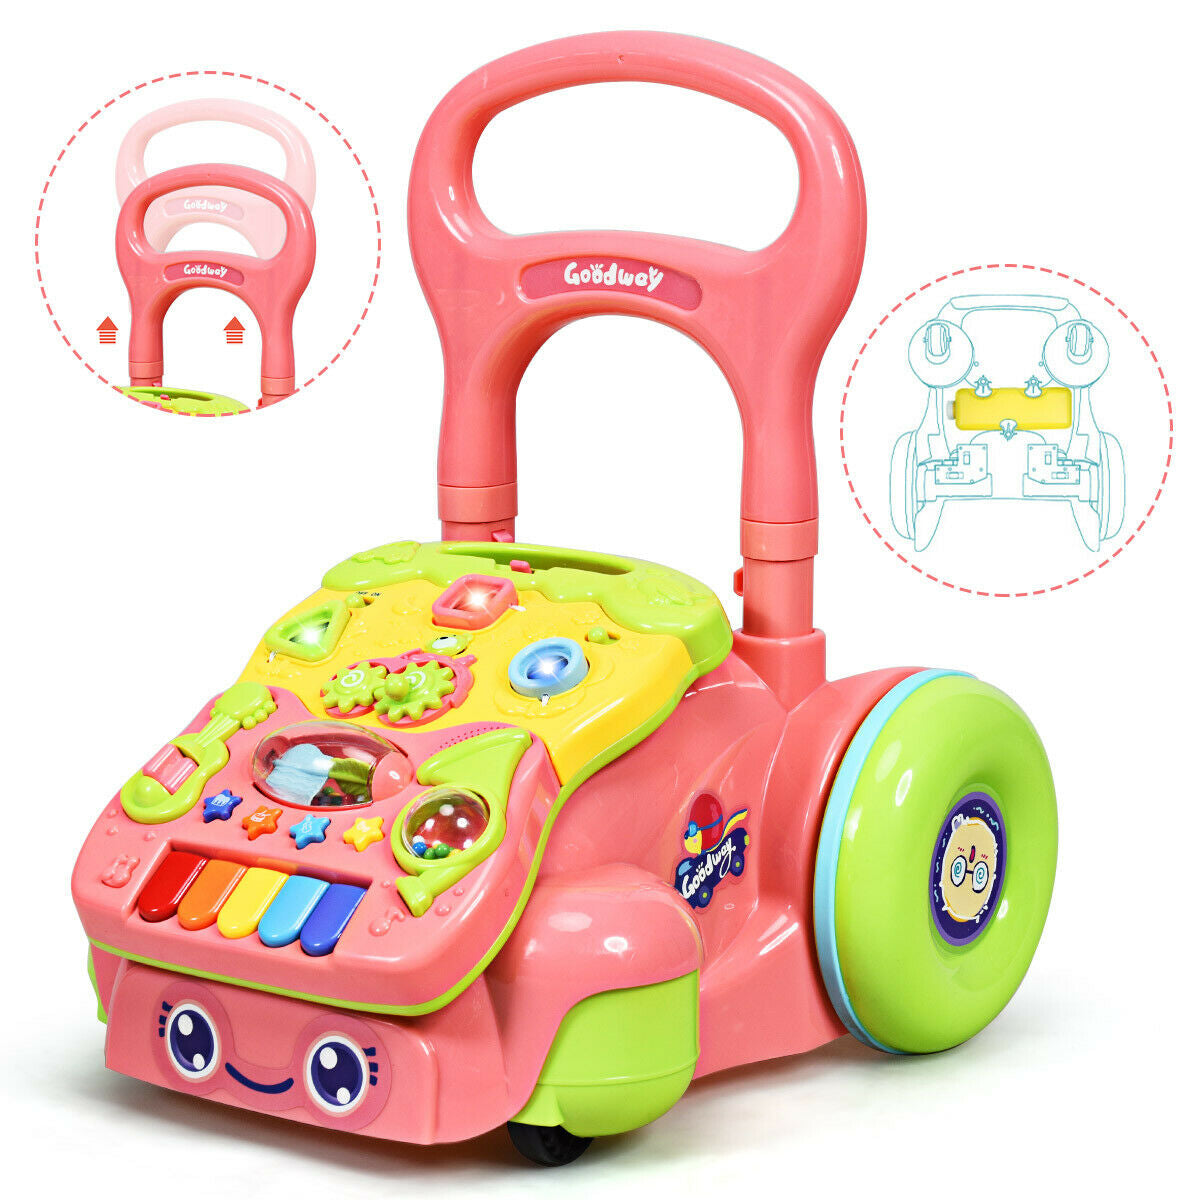 Sit-to-Stand Learning Baby Walker for Early Development Toys